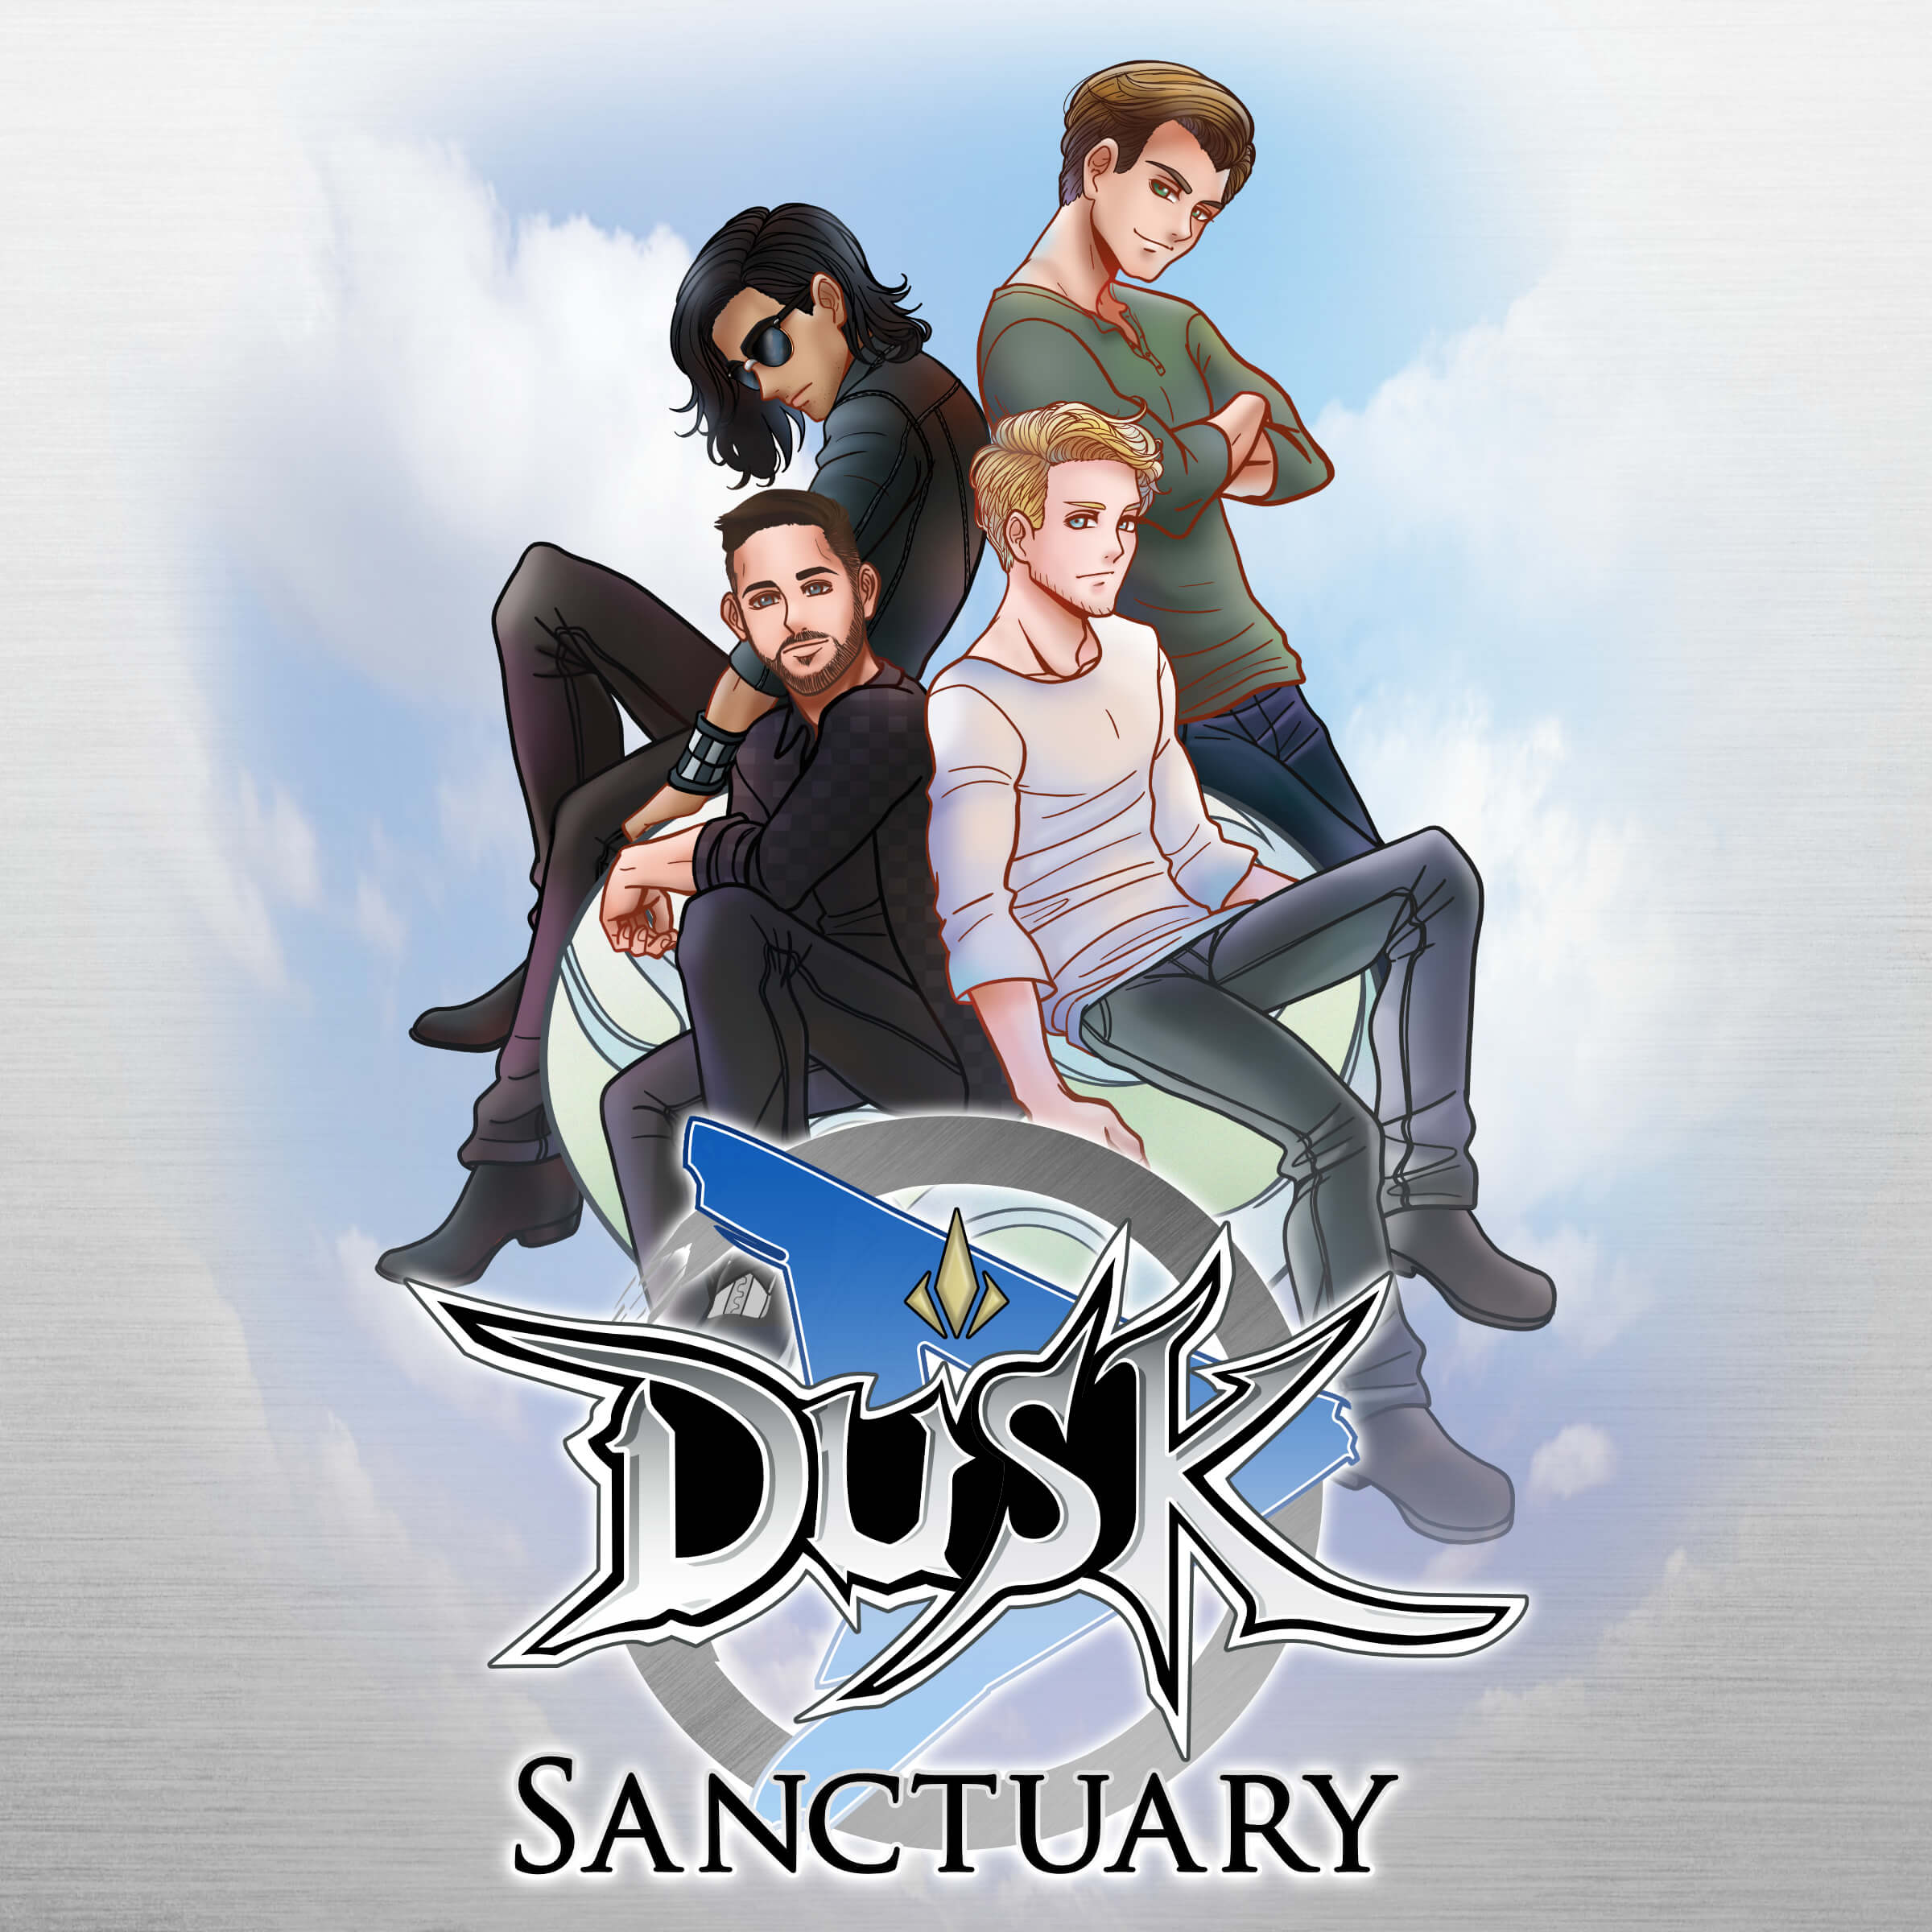 Alt-Rock Band Dusk Pays Tribute to Kingdom Hearts III with Cover of “Sanctuary”